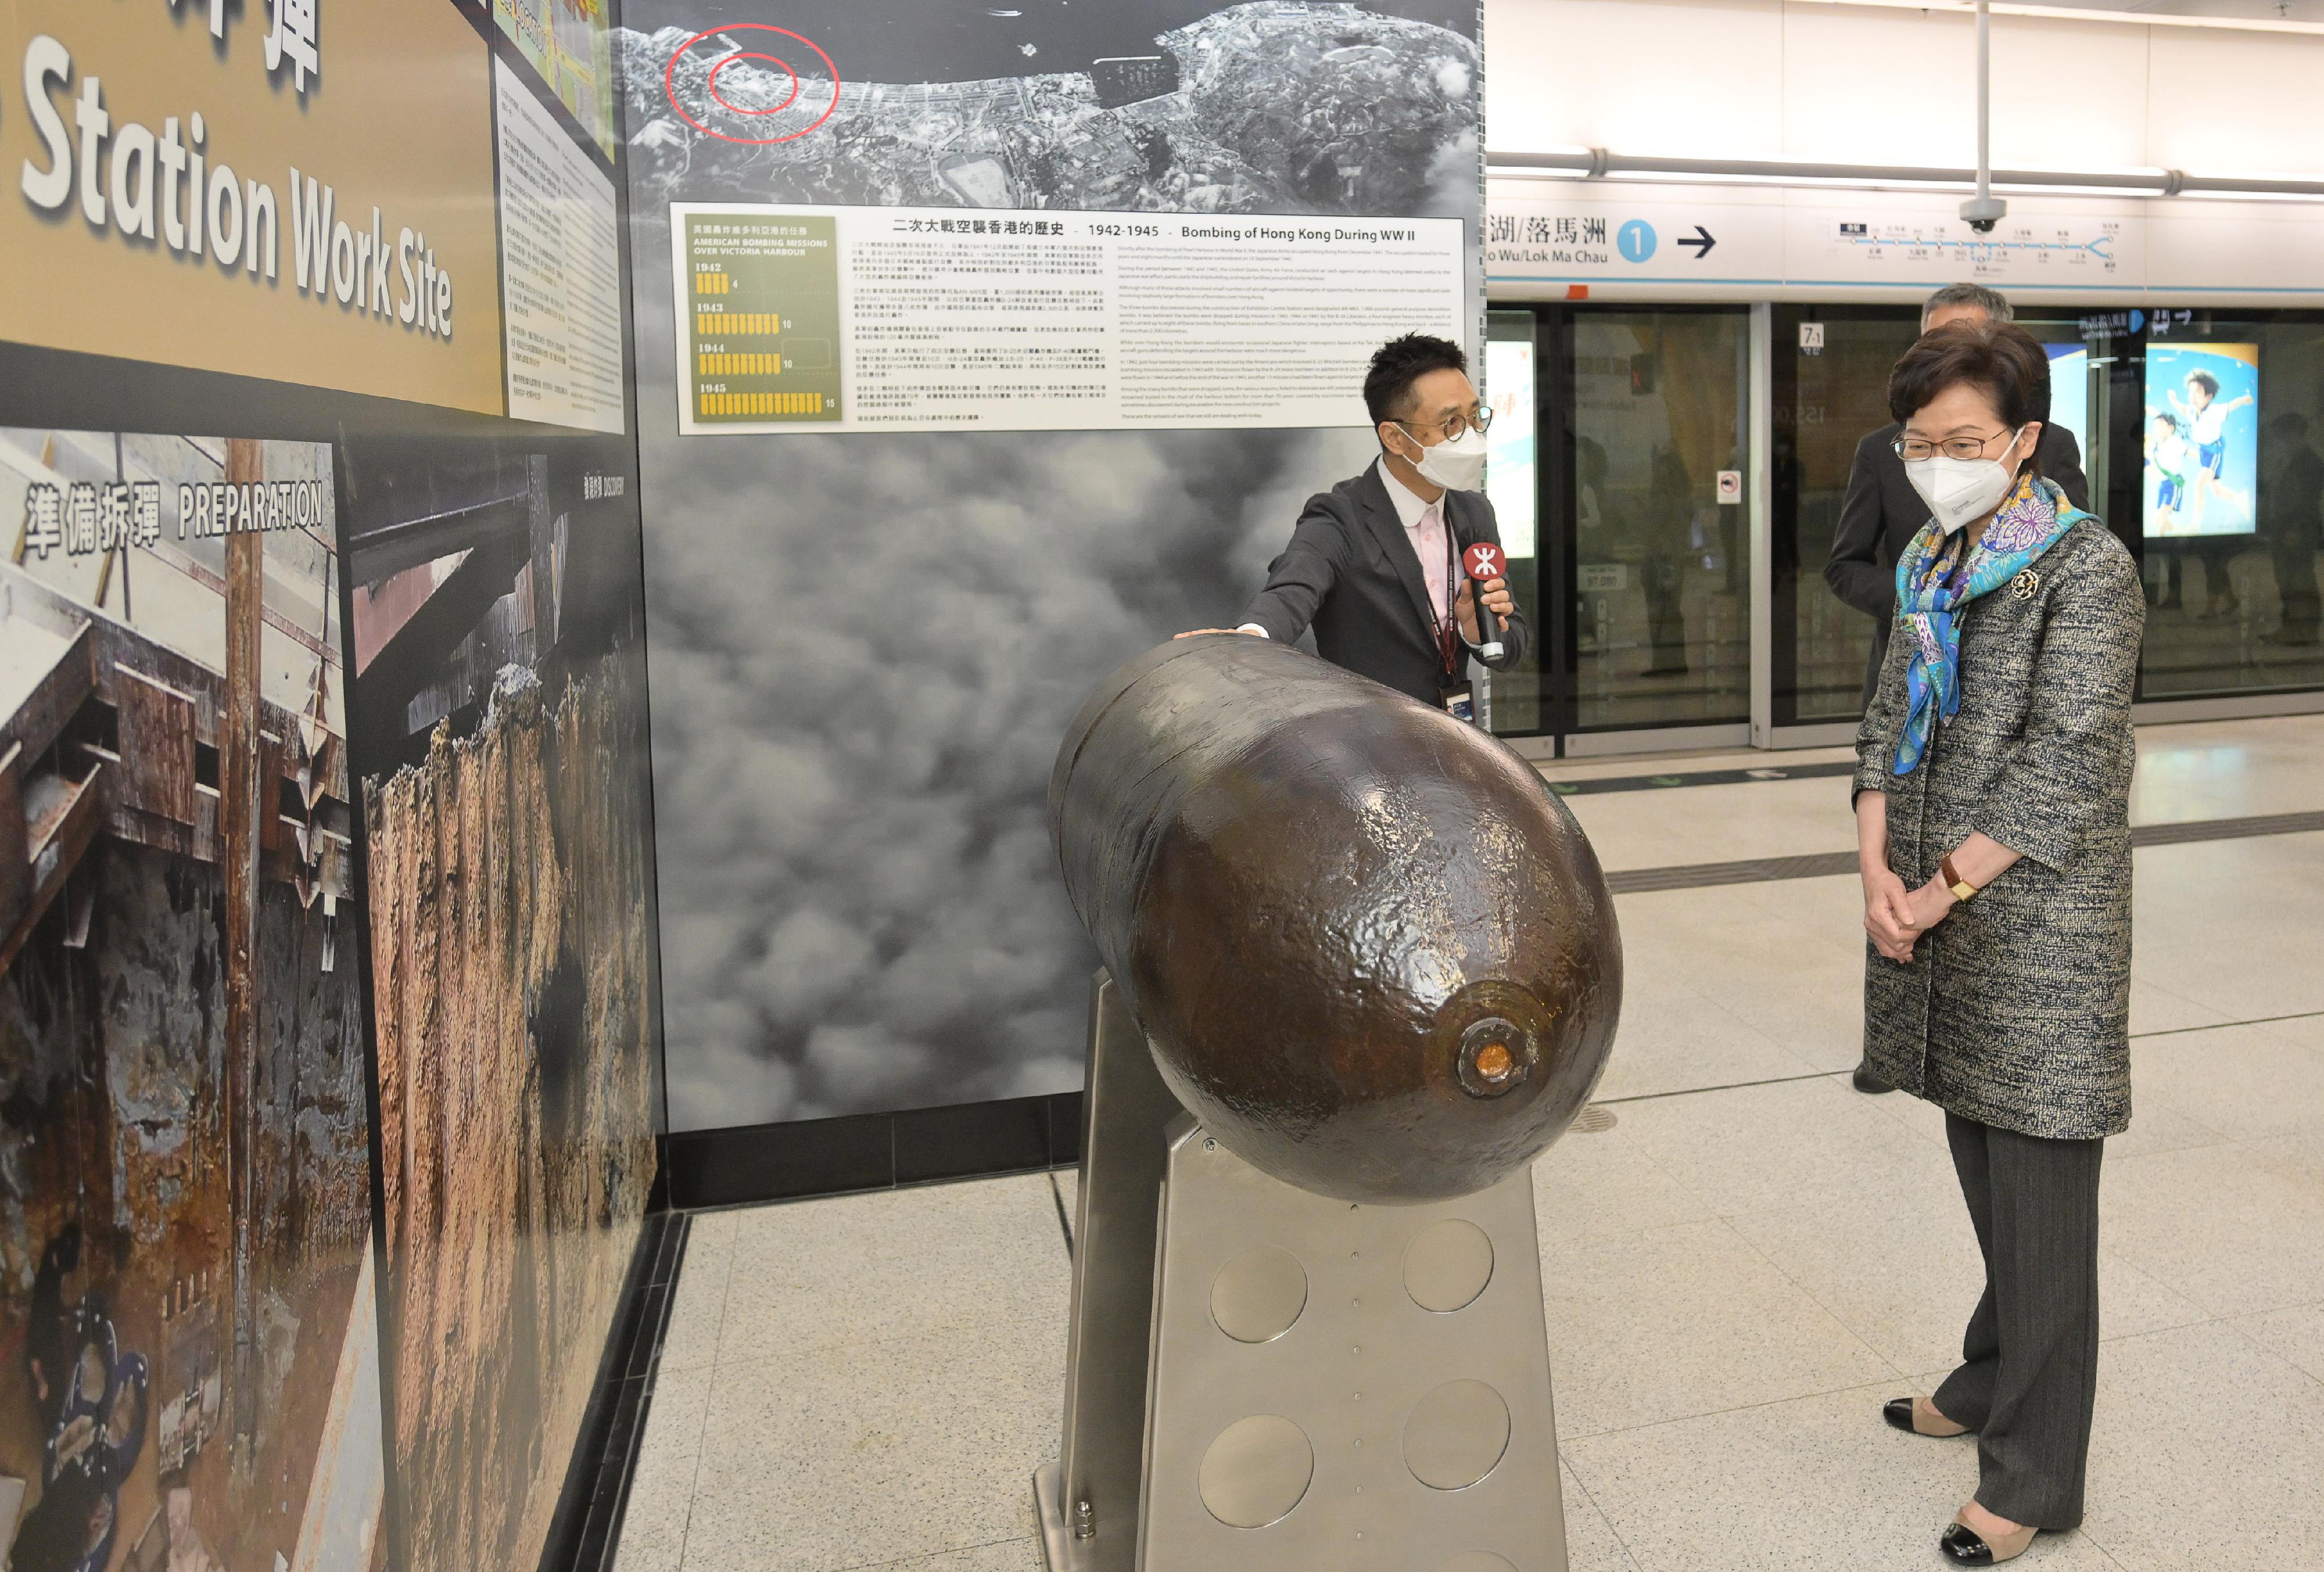 The Chief Executive, Mrs Carrie Lam, visited Wan Chai North today (May 4) to view the newly constructed Exhibition Centre Station of the East Rail Line cross-harbour extension and the neighbouring facilities. Photo shows Mrs Lam (right) viewing the casing of a bomb dropped during World War II discovered in the course of excavation work.